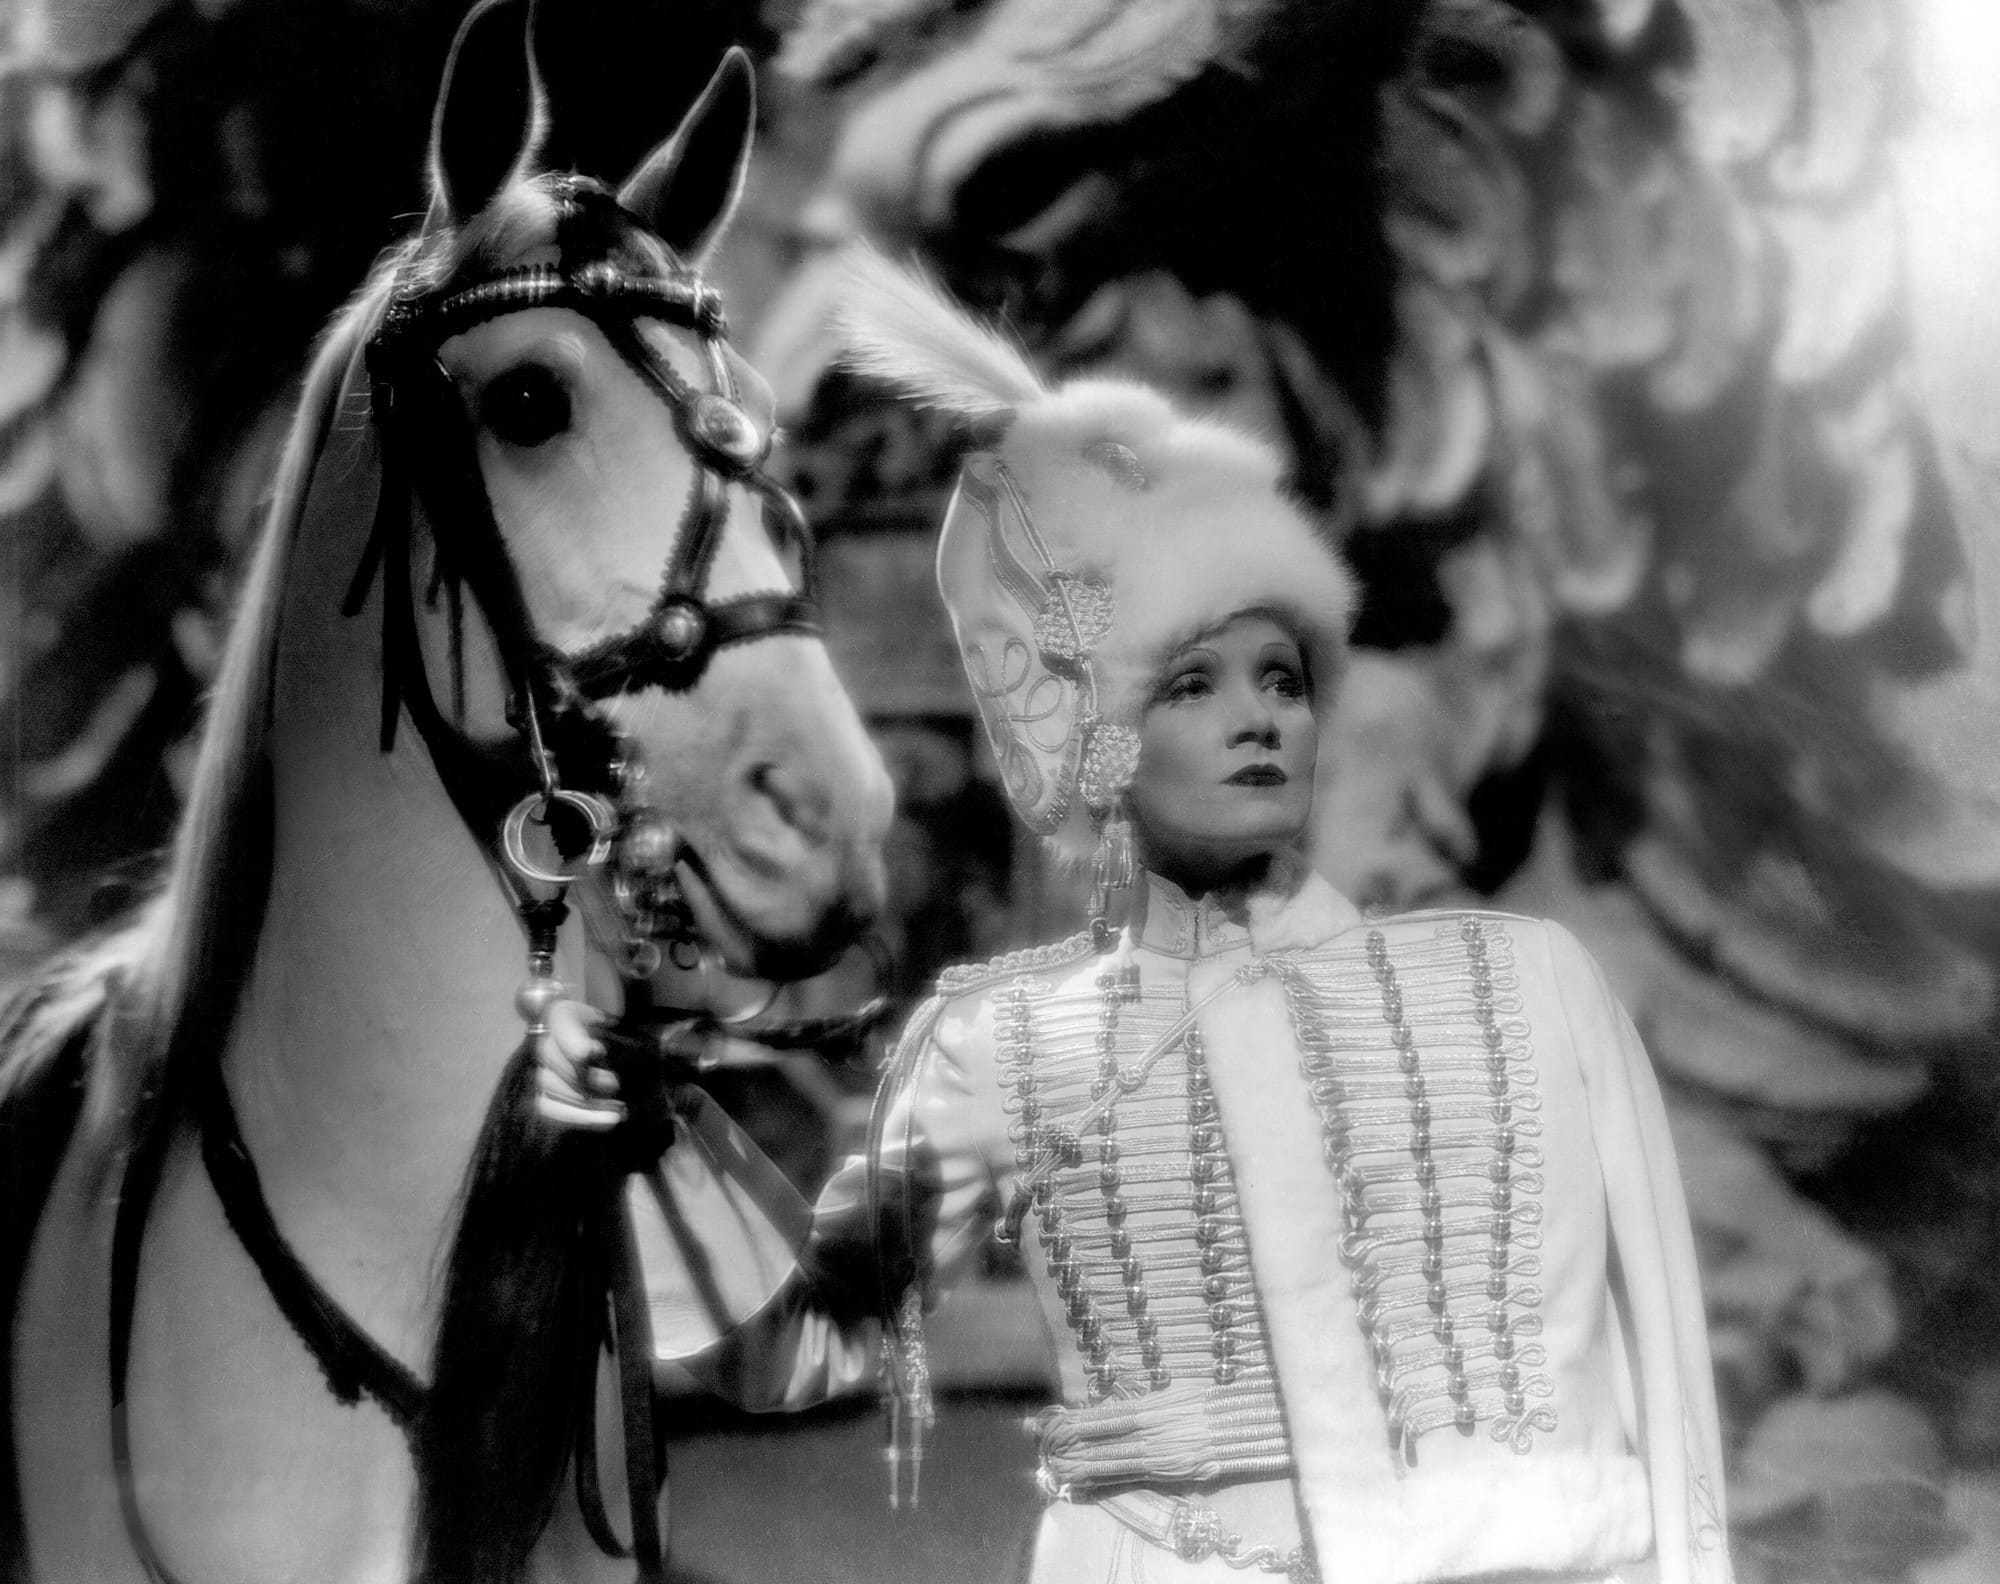 Marlene Dietrich in fur hat and with horse